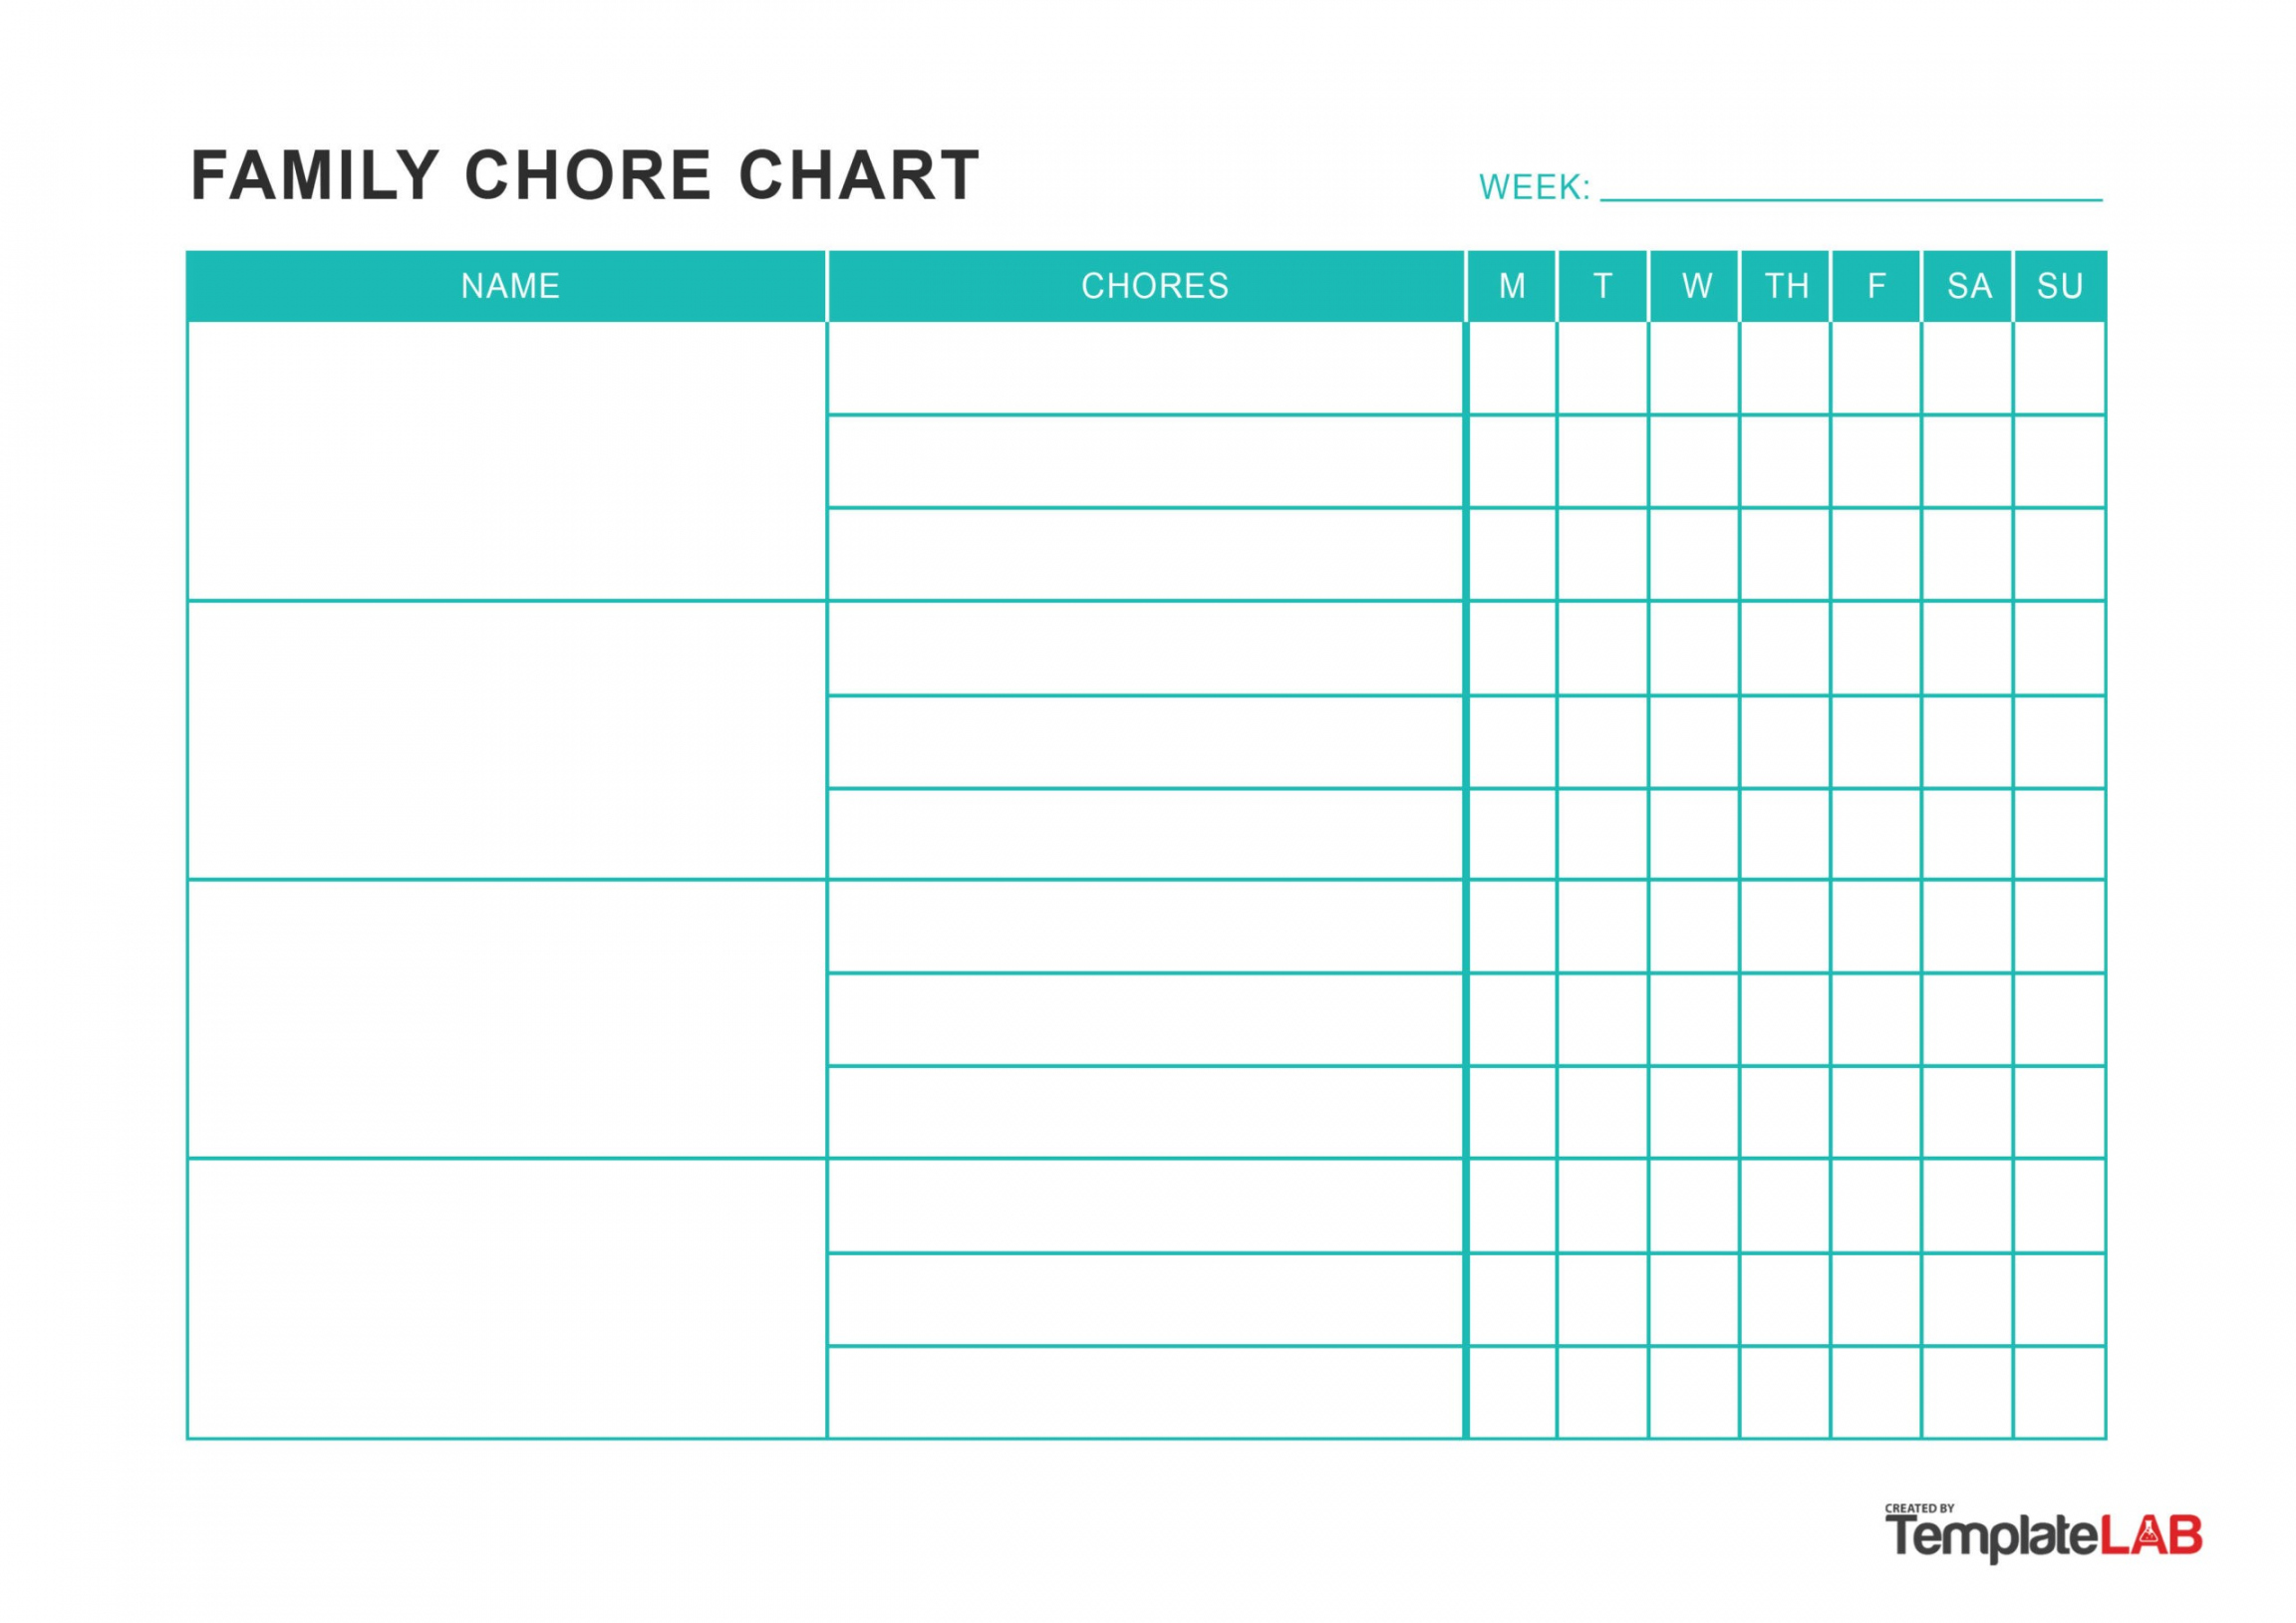 FREE Chore Chart Templates for Kids ᐅ TemplateLab - FREE Printables - Free Printable Chore Charts For Family